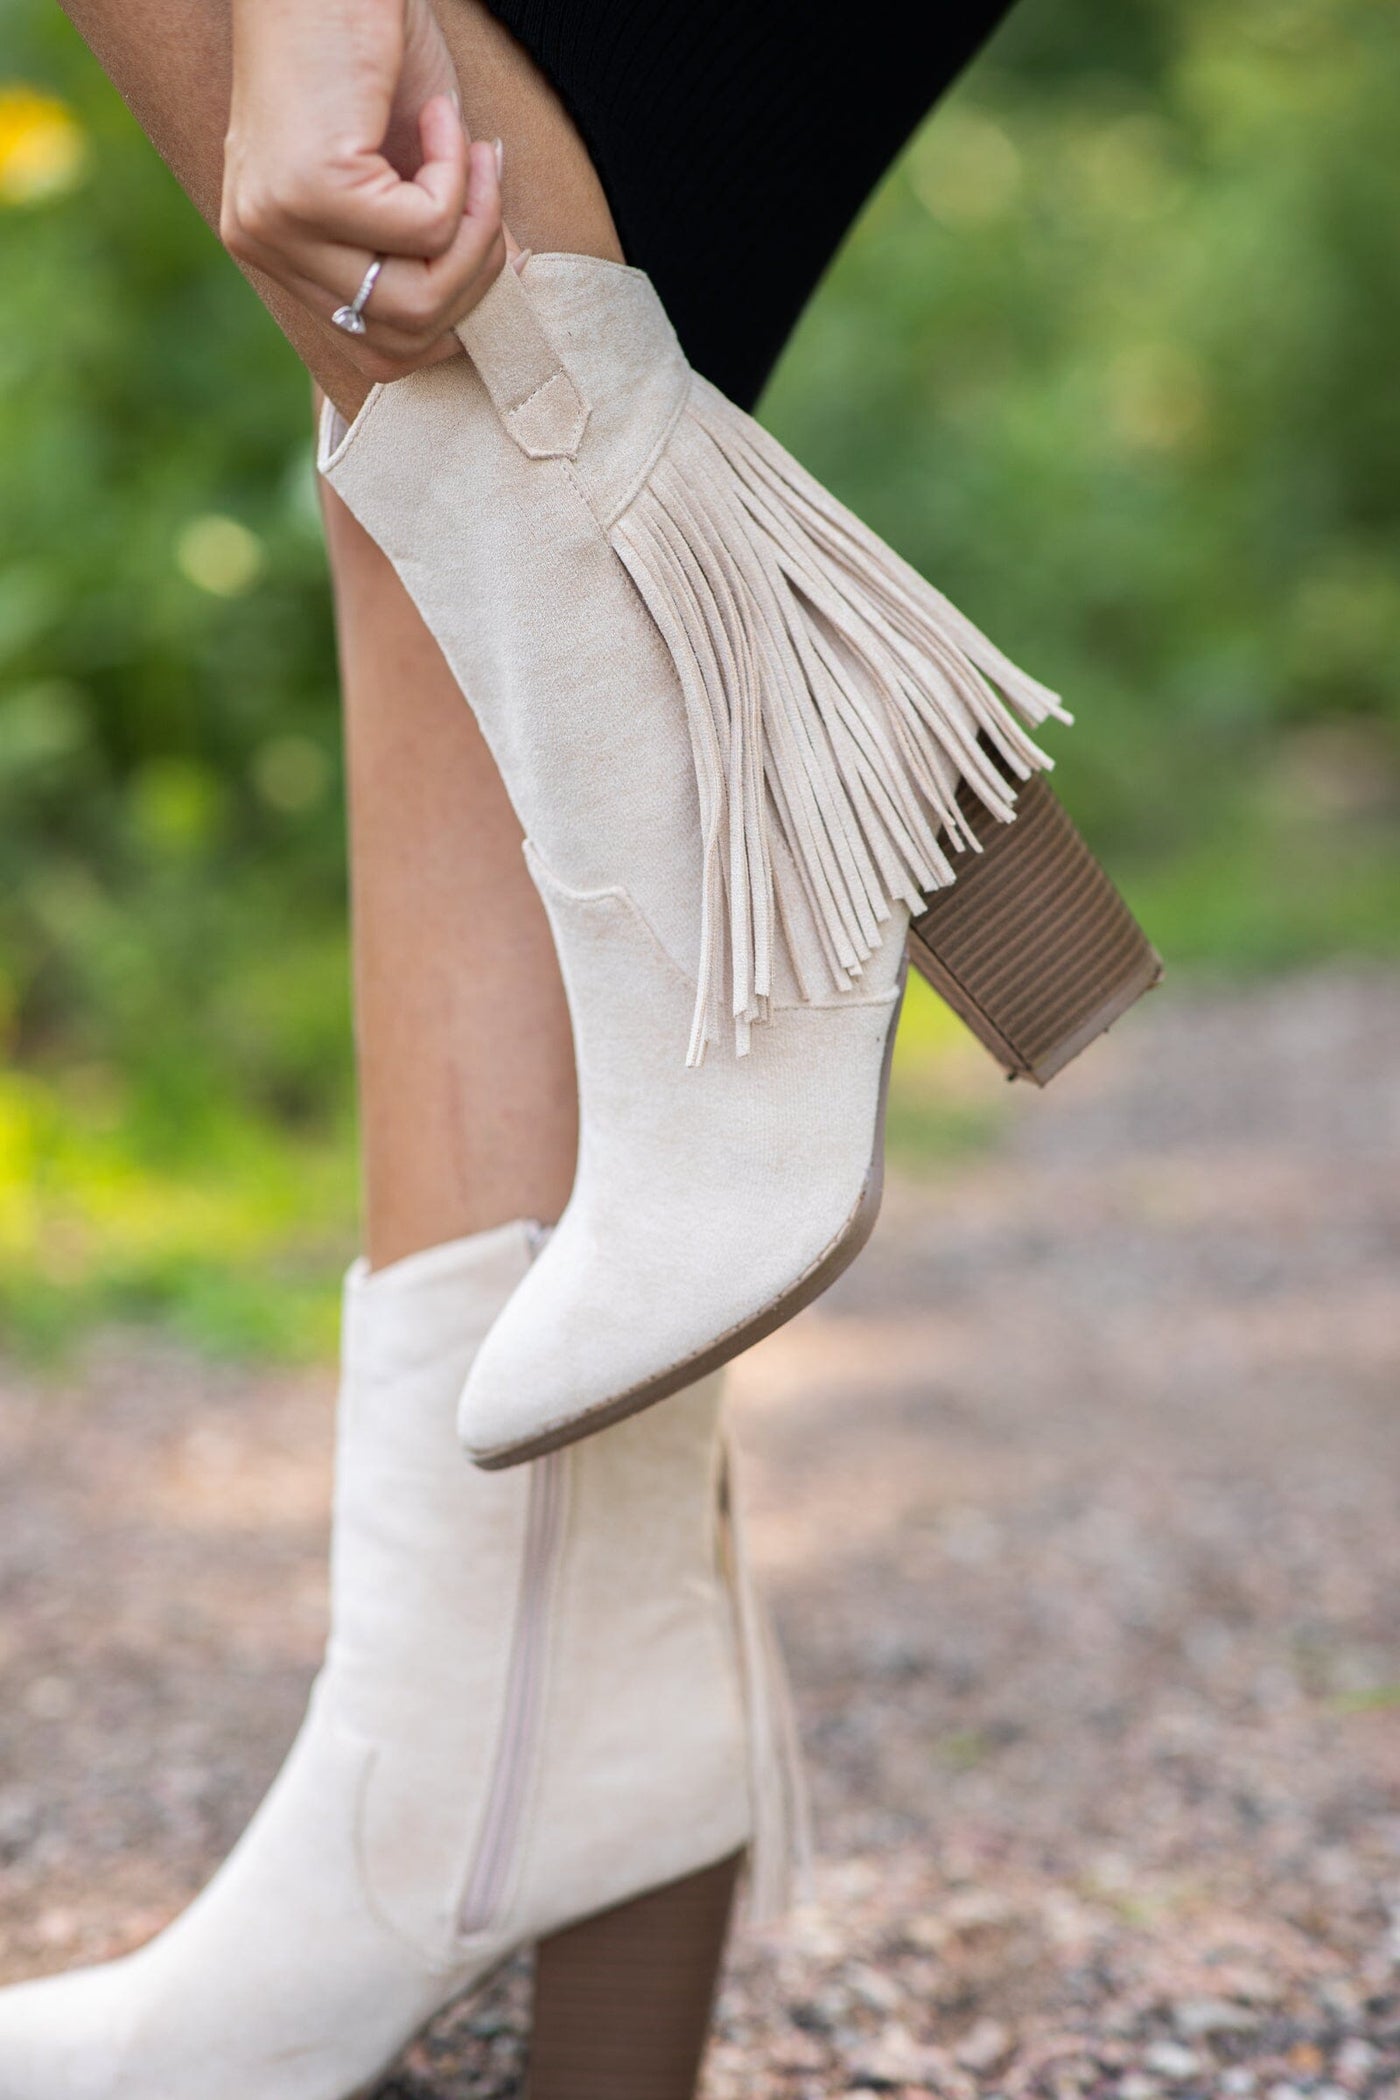 Beige Mid Calf Boots With Fringe Detail - Filly Flair